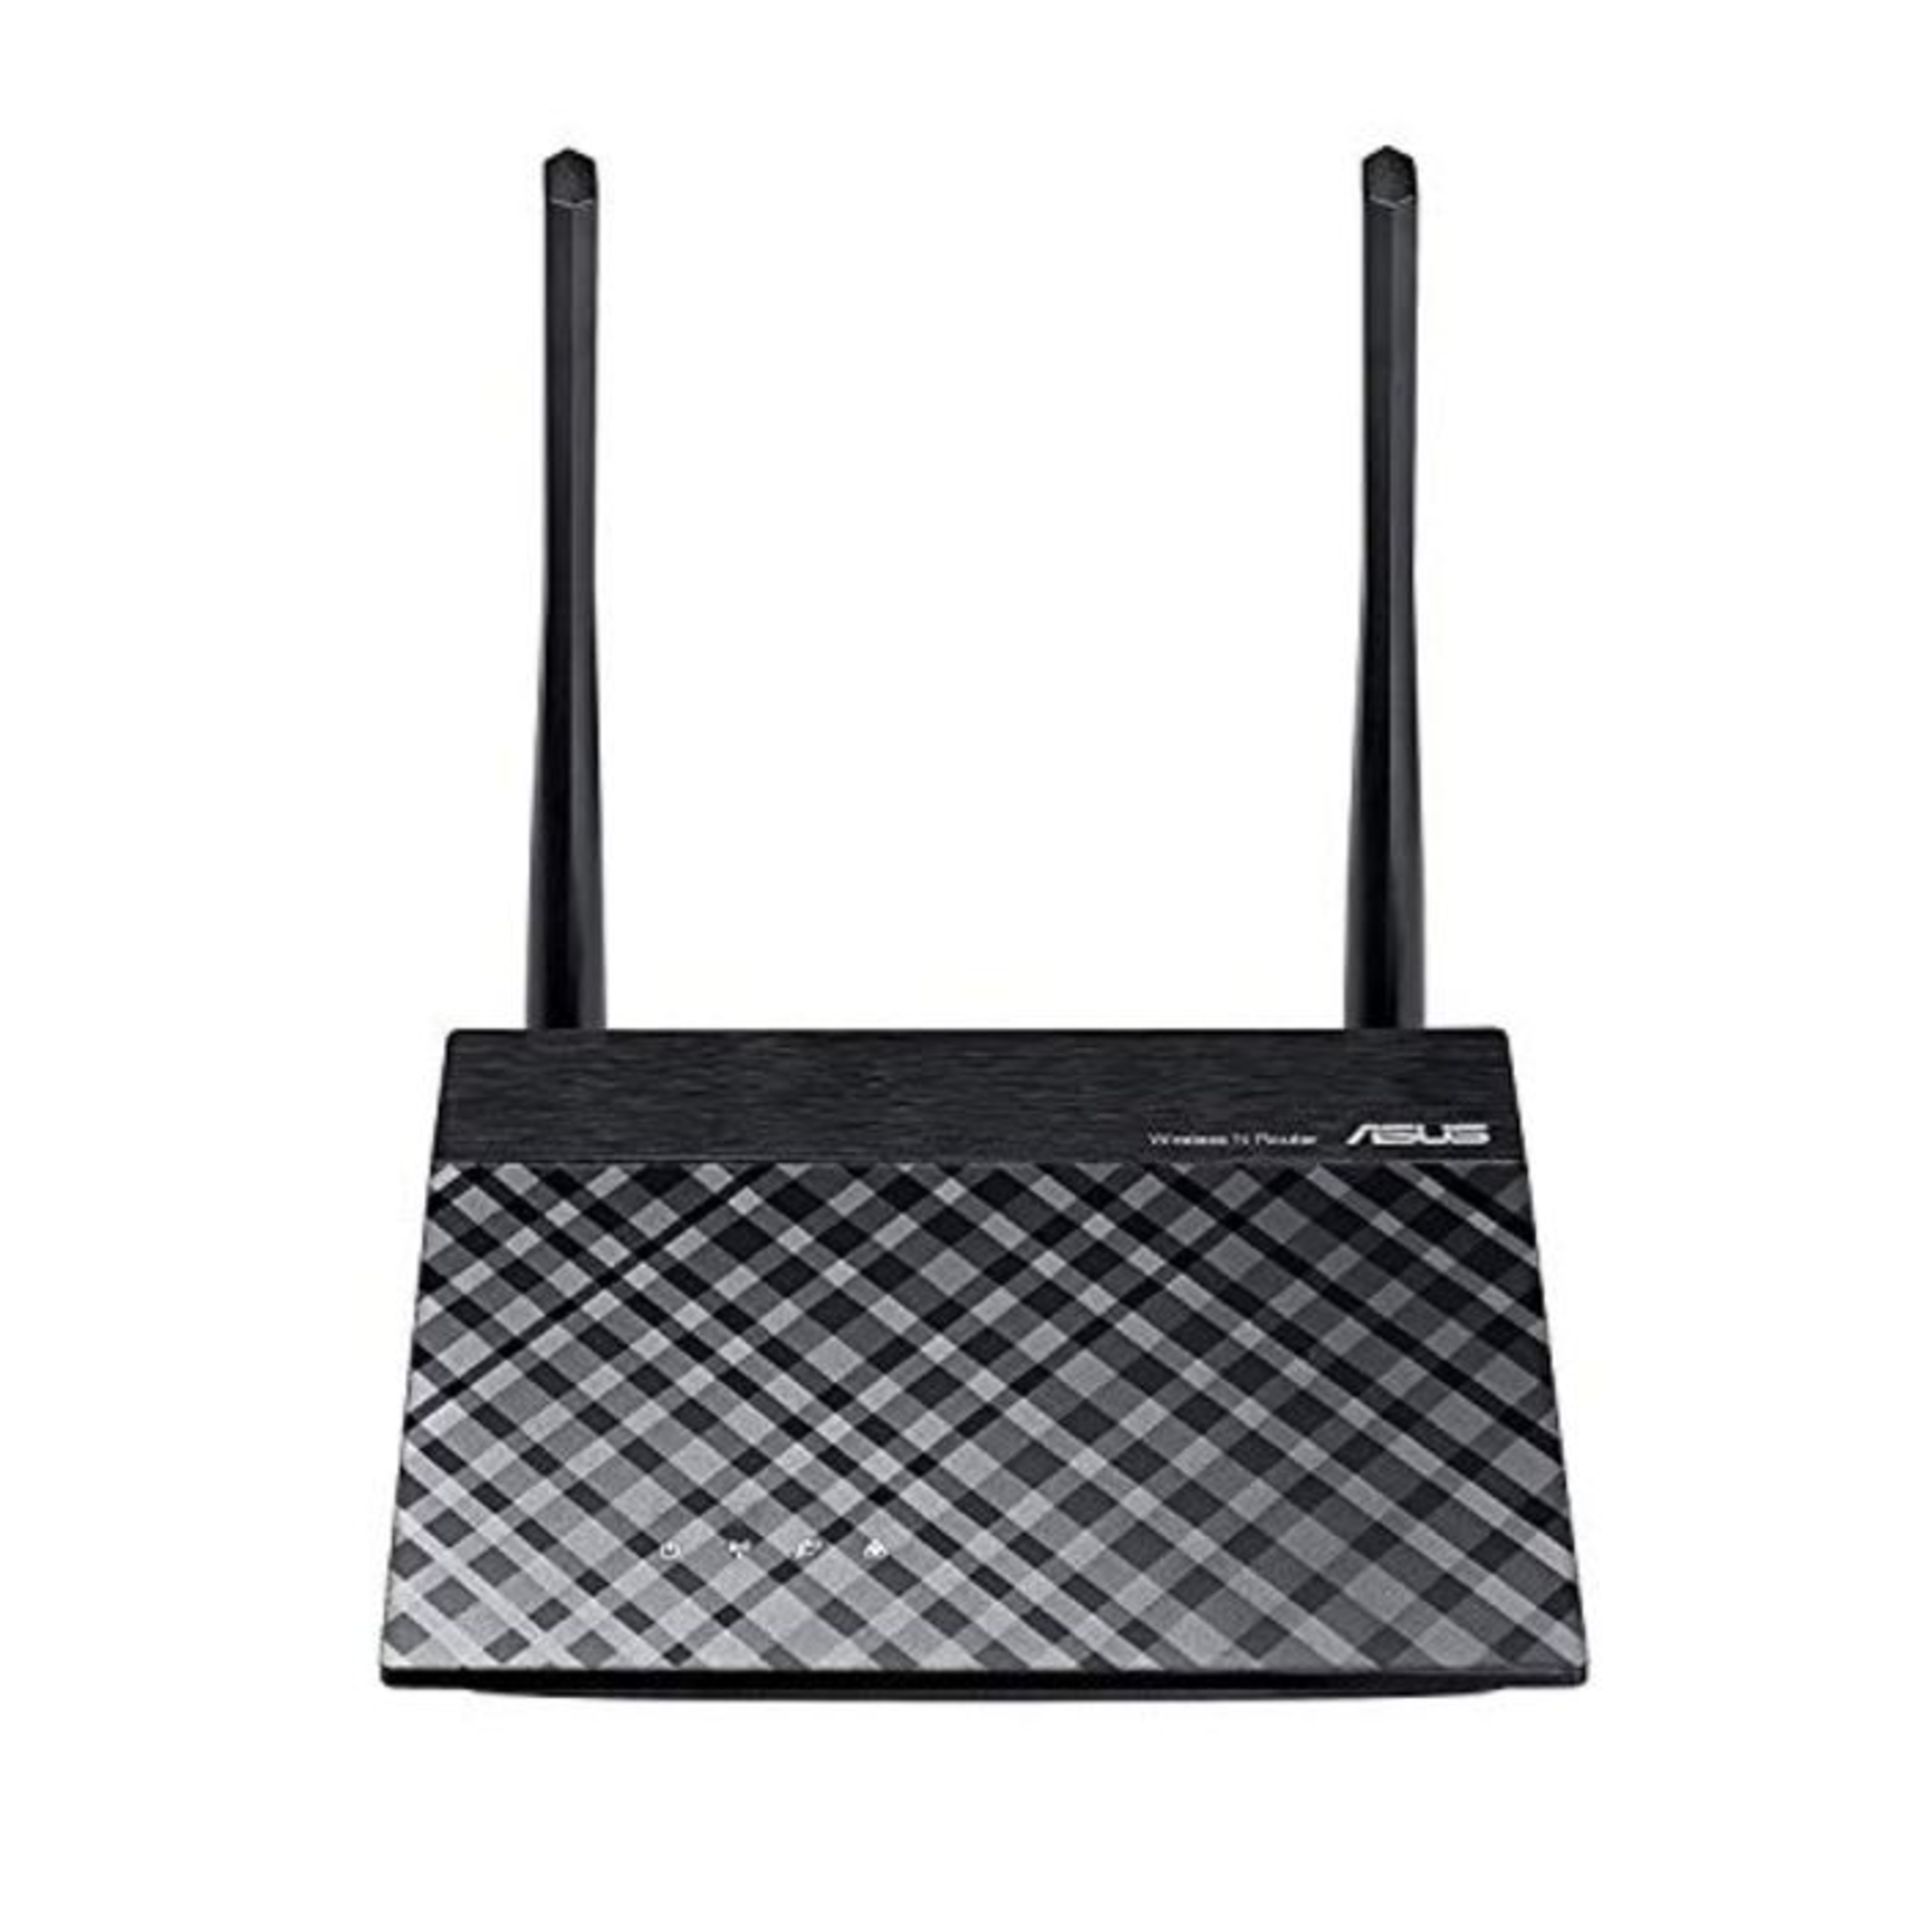 ASUS RT-N12LX Wi-Fi Ethernet LAN Black router- routers (0 - 45 °C, -20 - 70 °C, 10 -